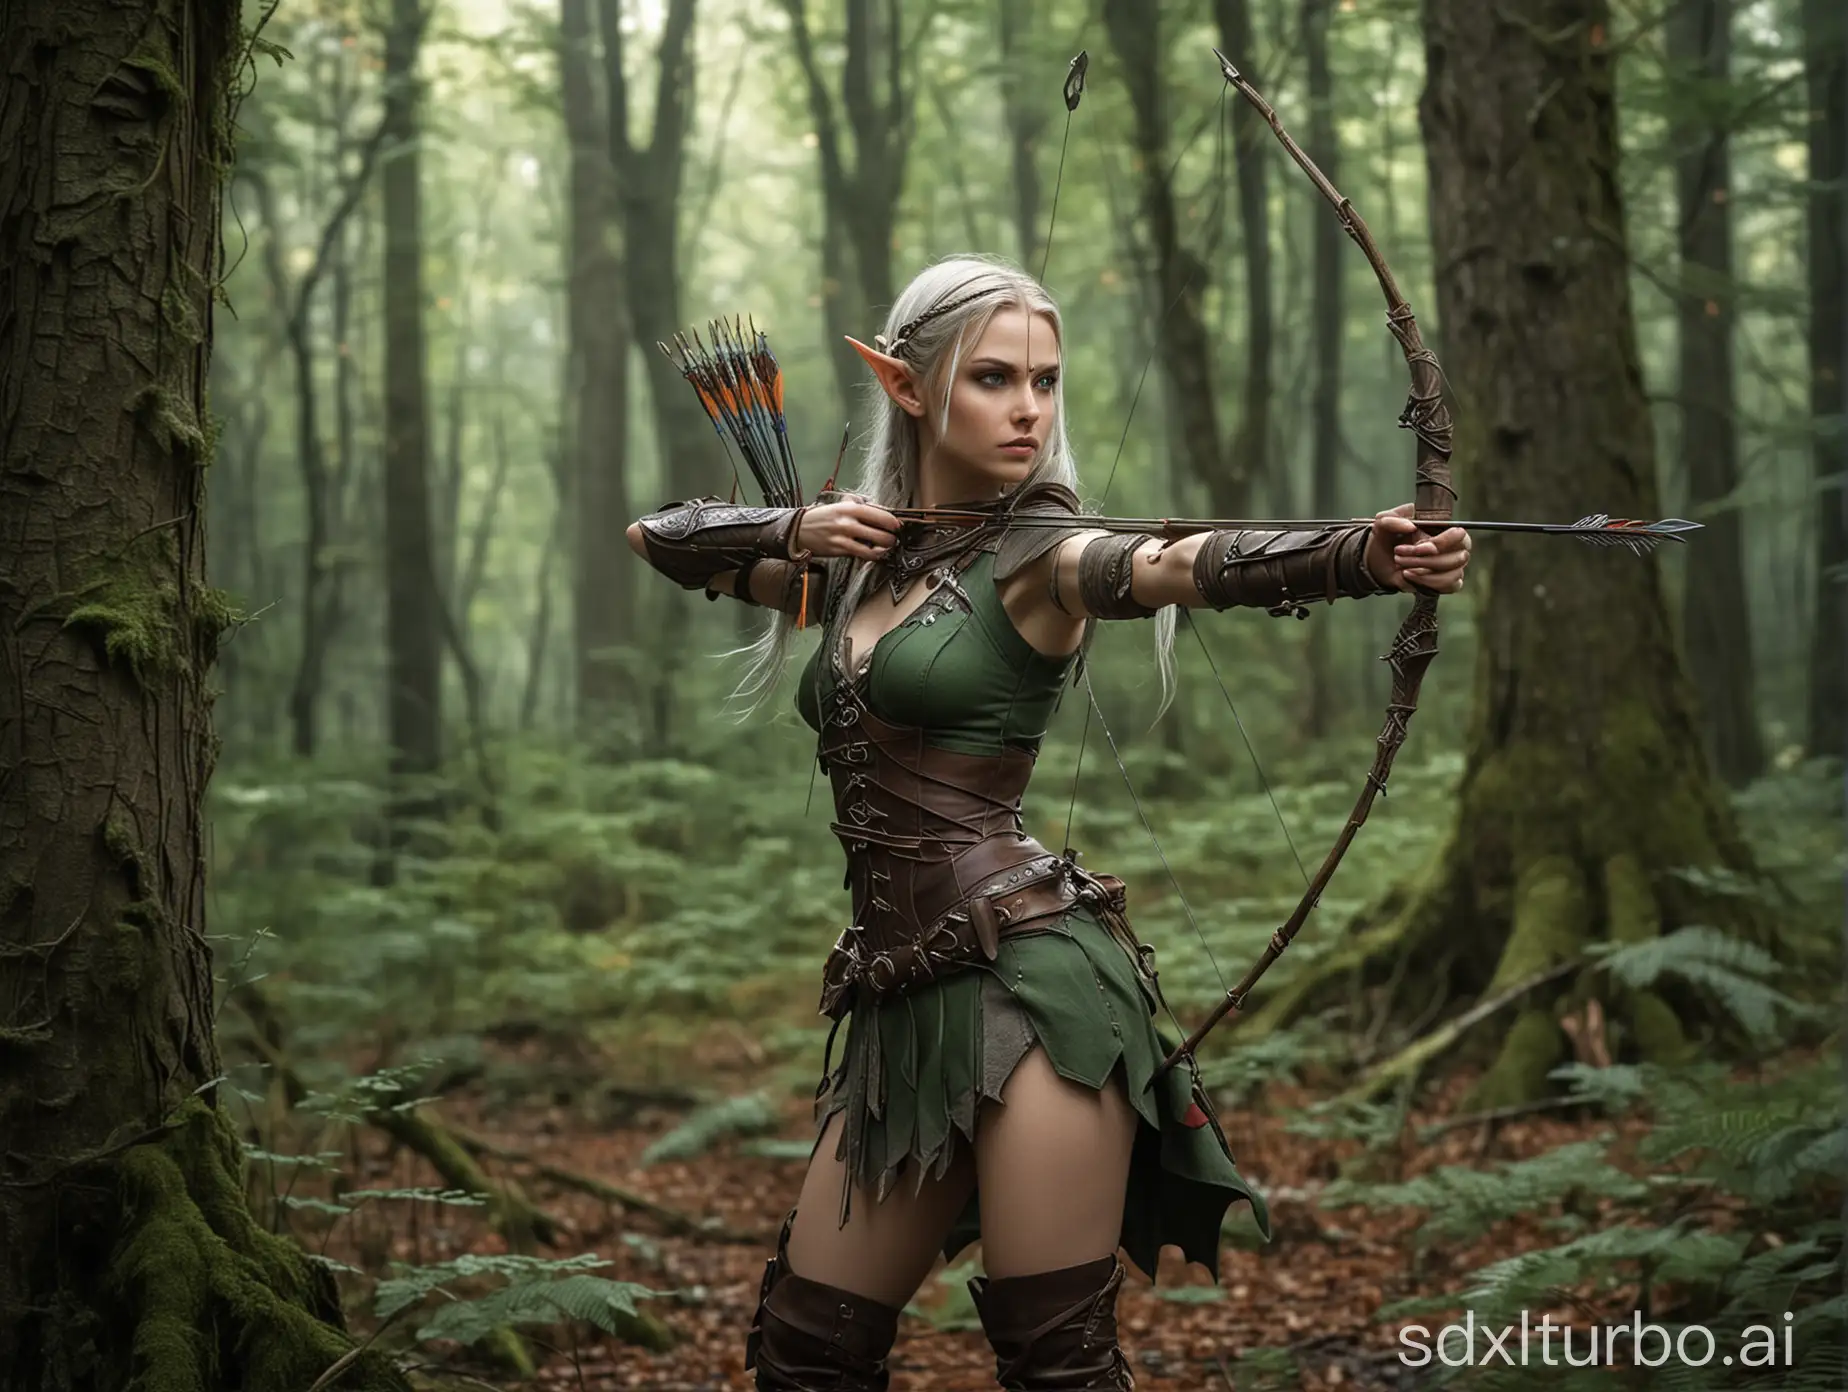 a female fantasy forest elf on the hunt with arrow and bow